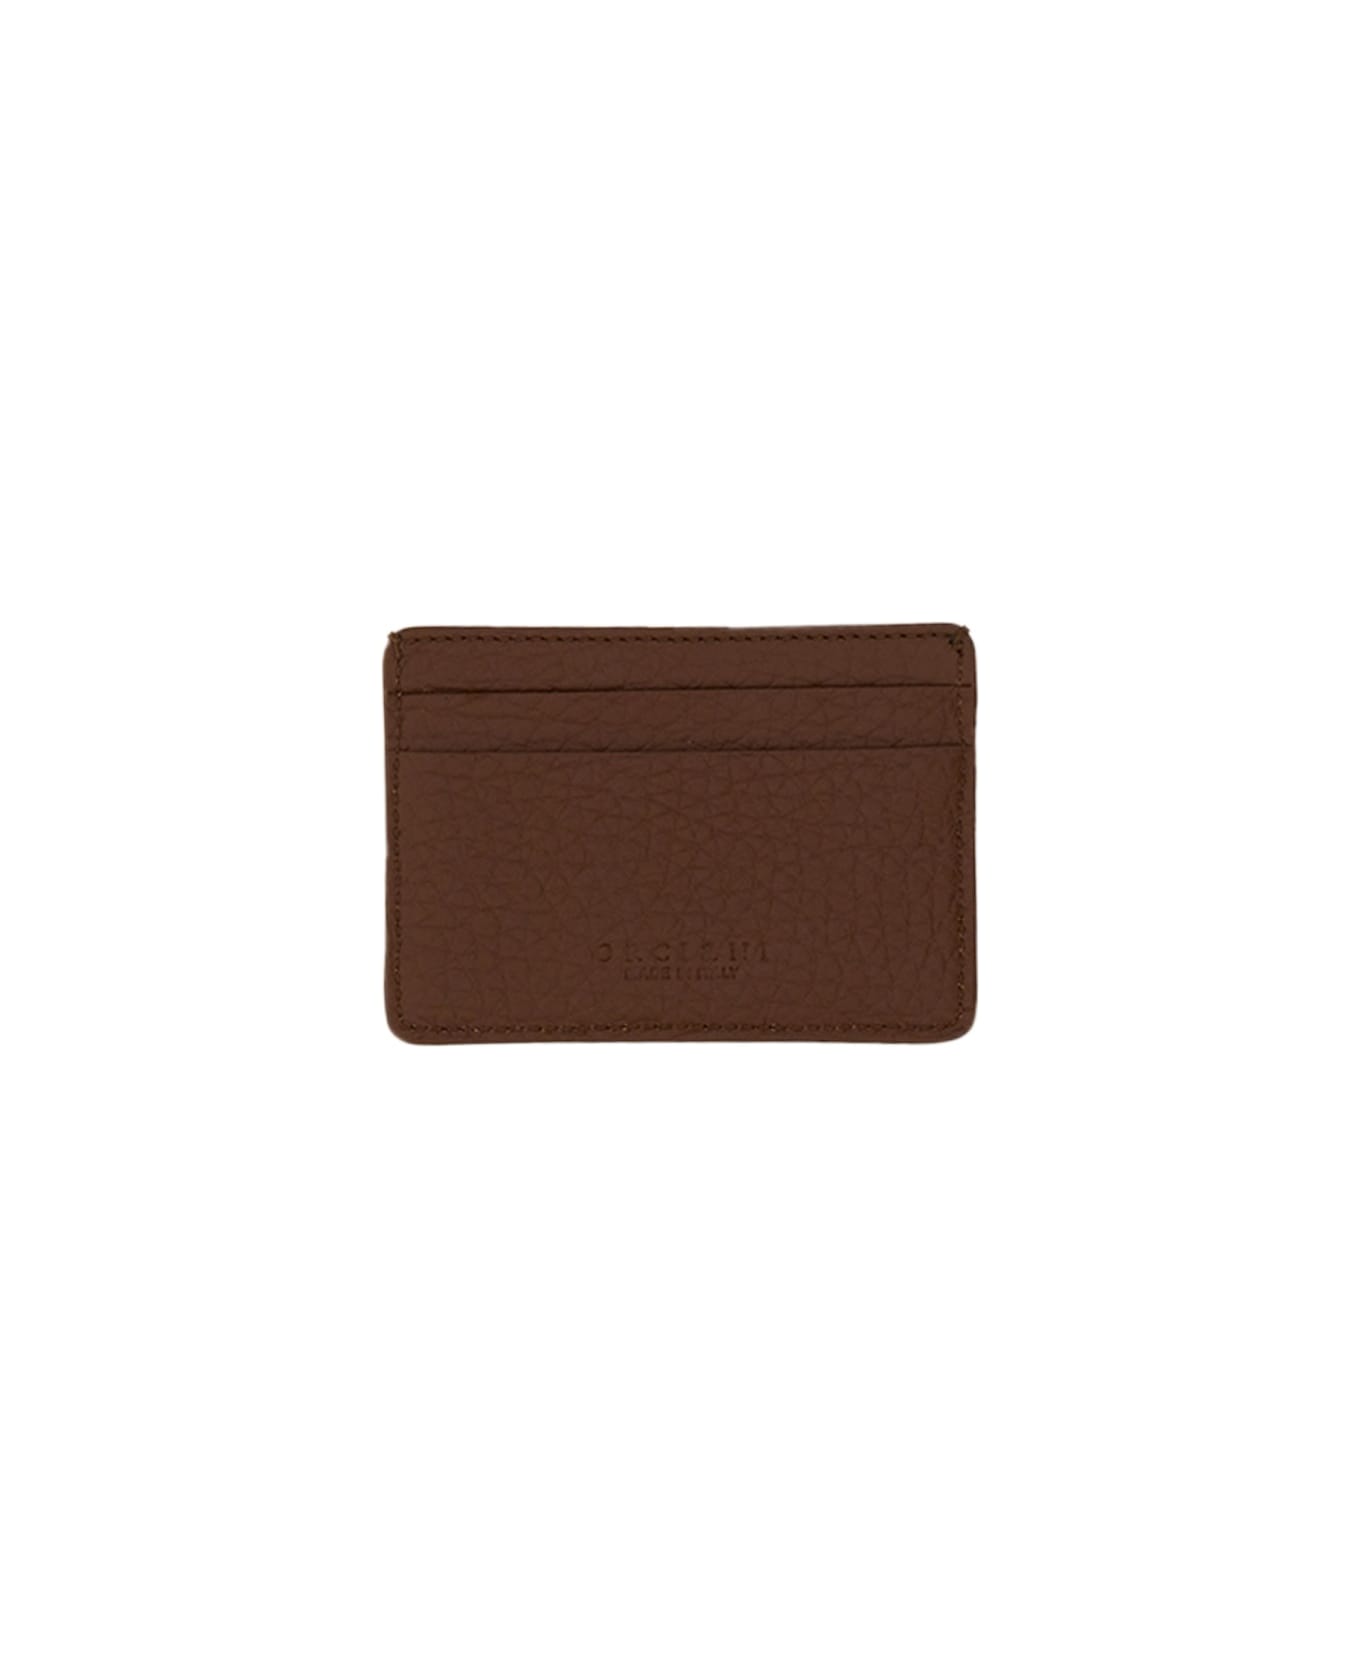 Orciani Soft Card Holder - BROWN